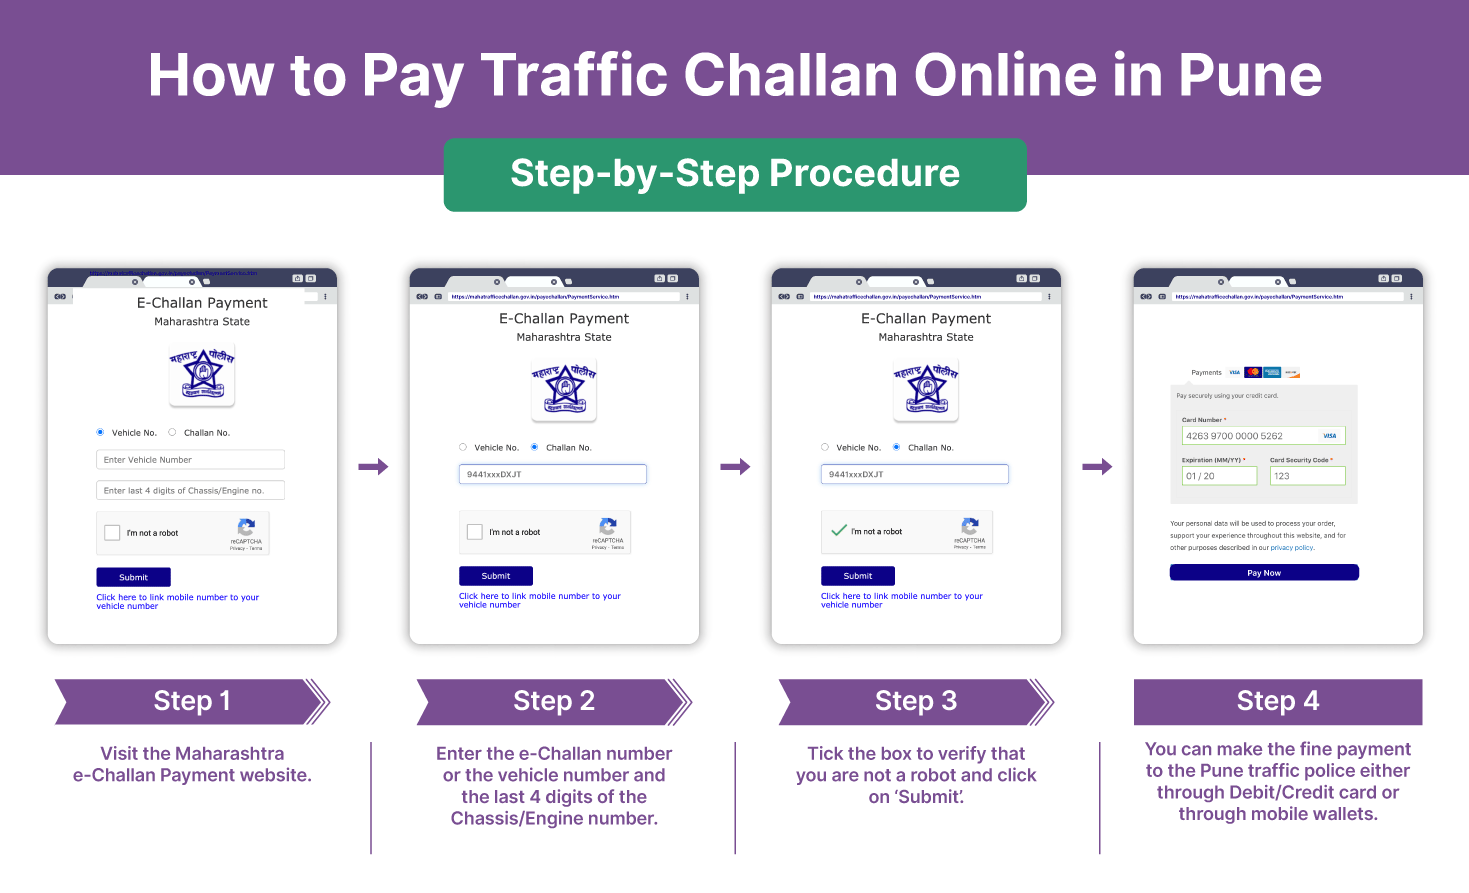 How to Pay Traffic Challan Online in Pune?